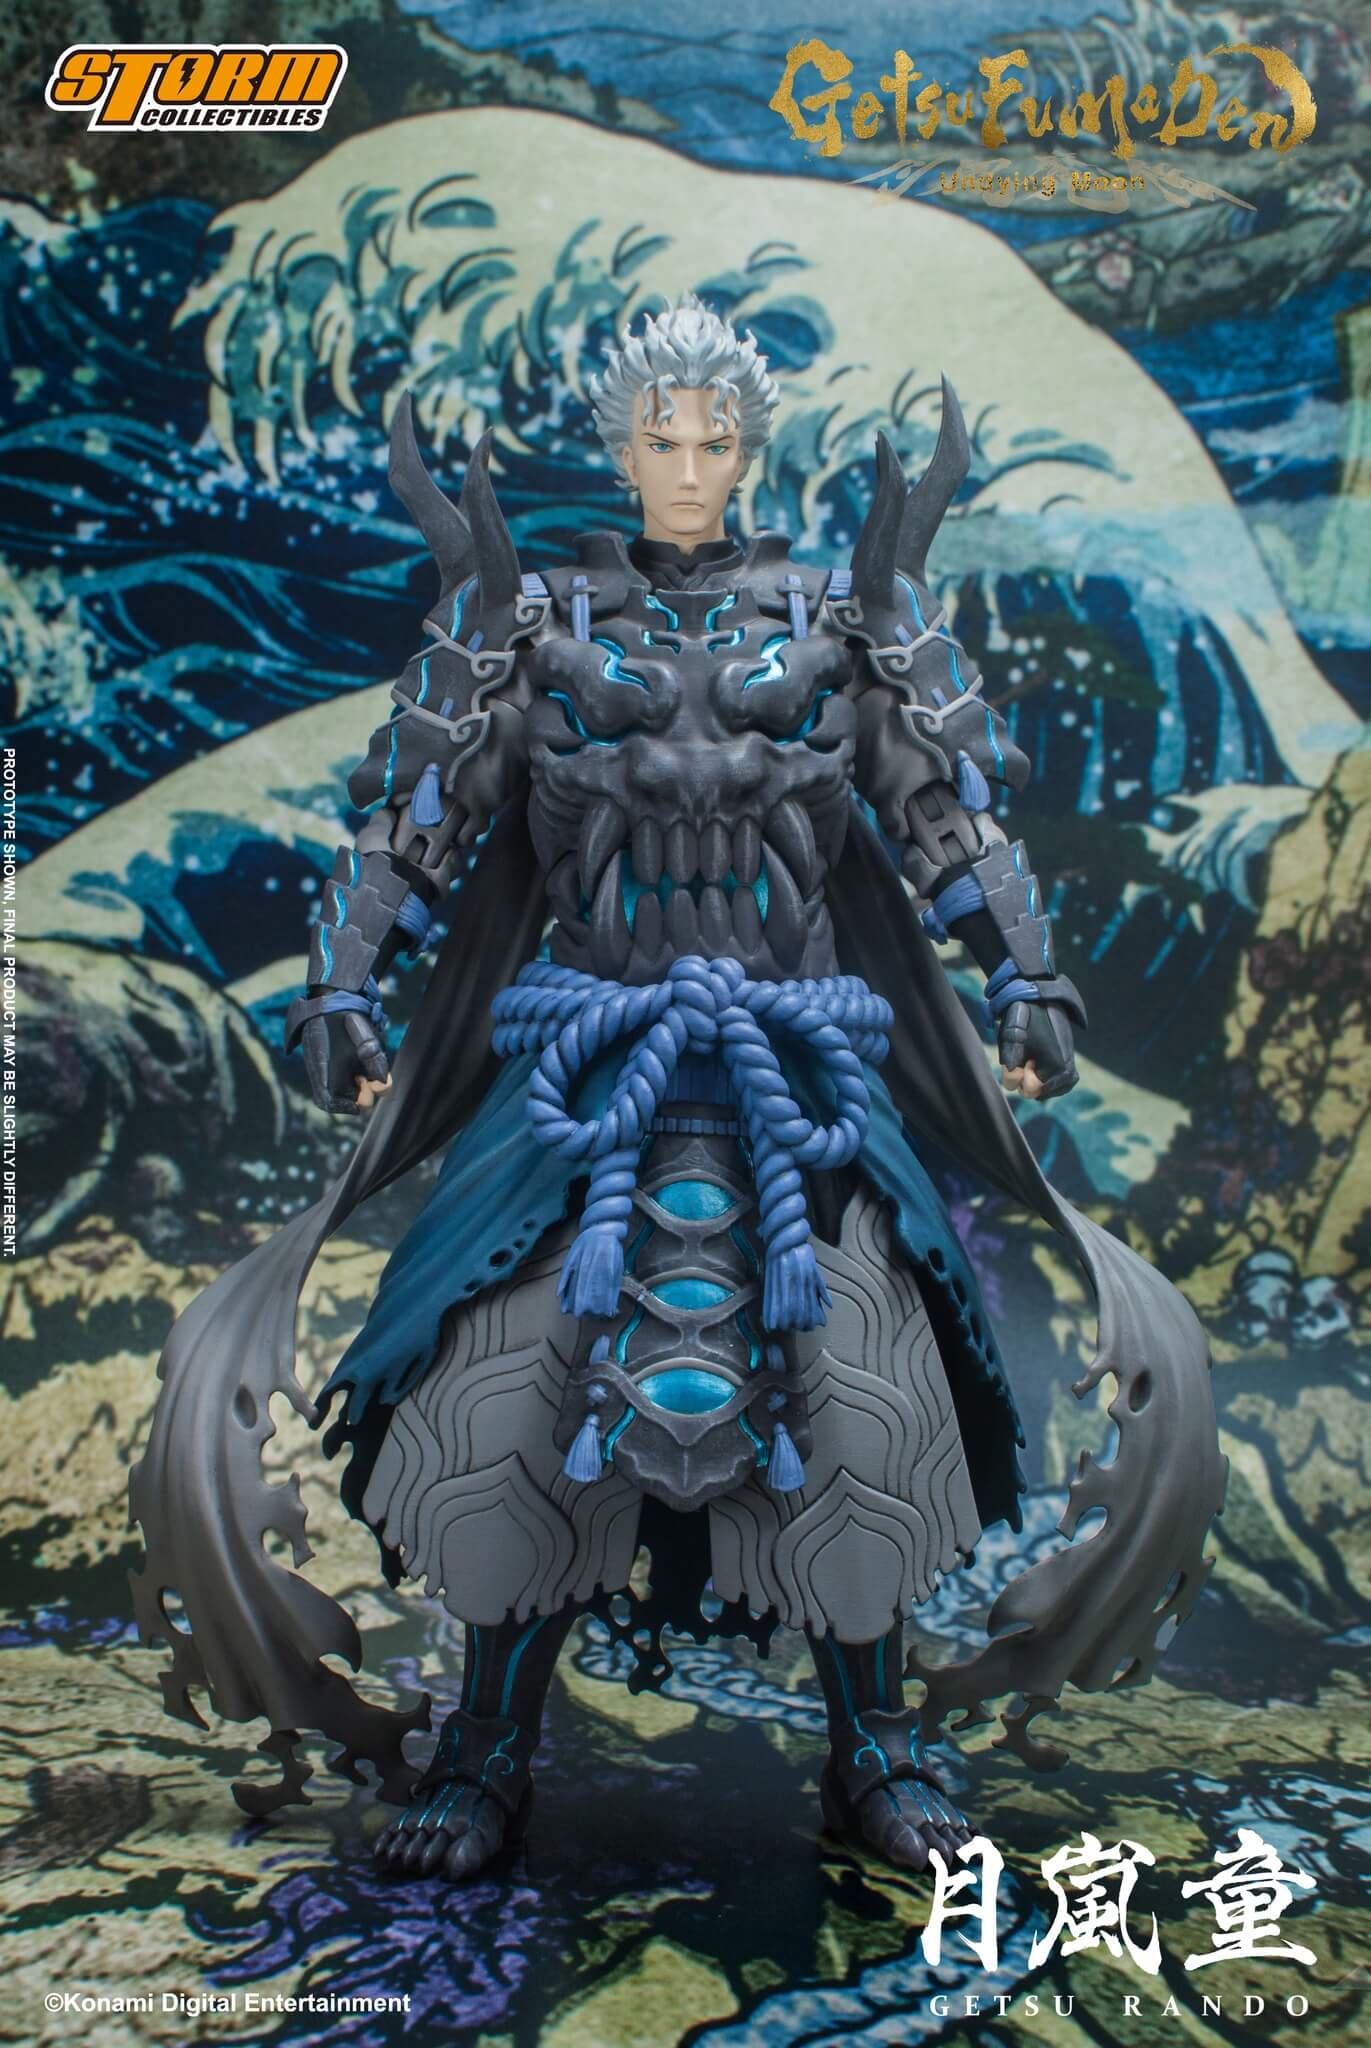 Storm Collectibles GFUD02 1/12 Undying Moon - Gets Rando